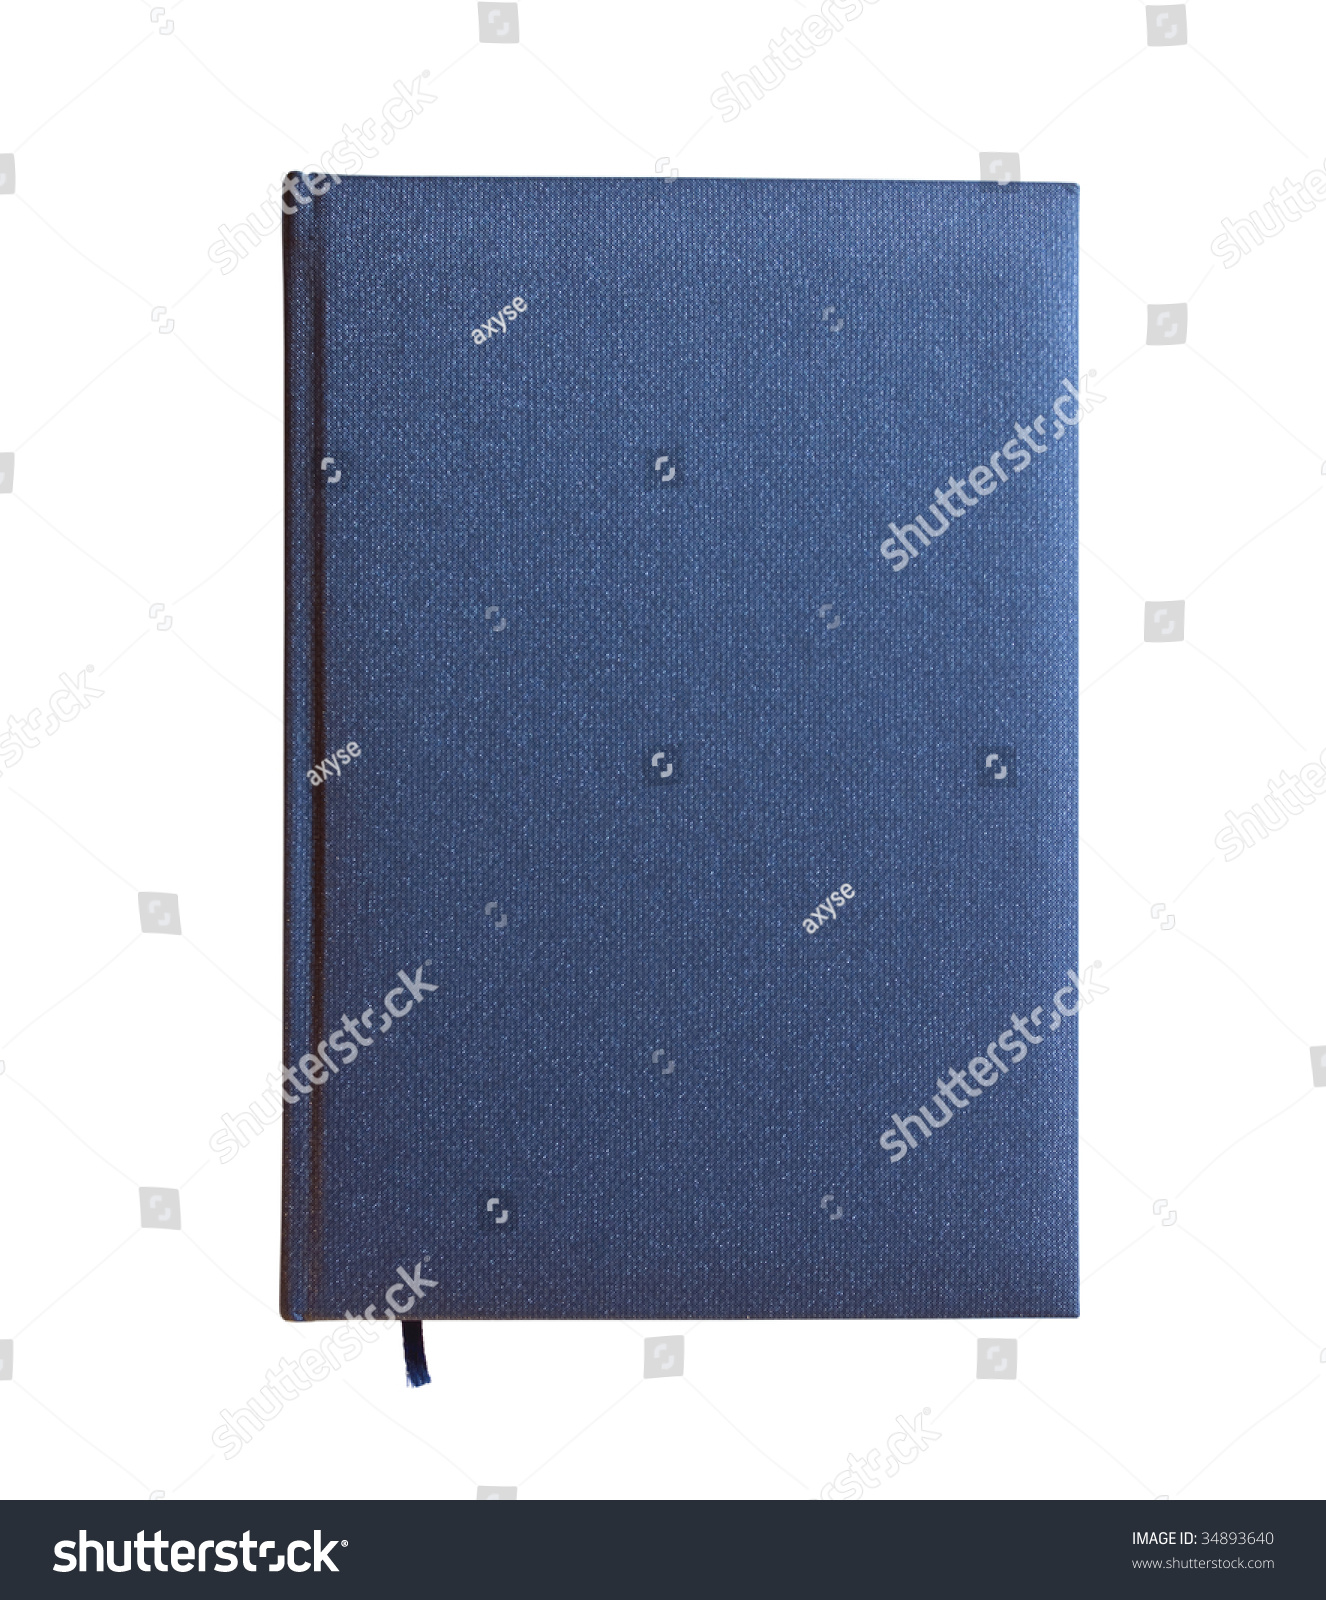 Blue closed book isolated over white background. View from above. #34893640